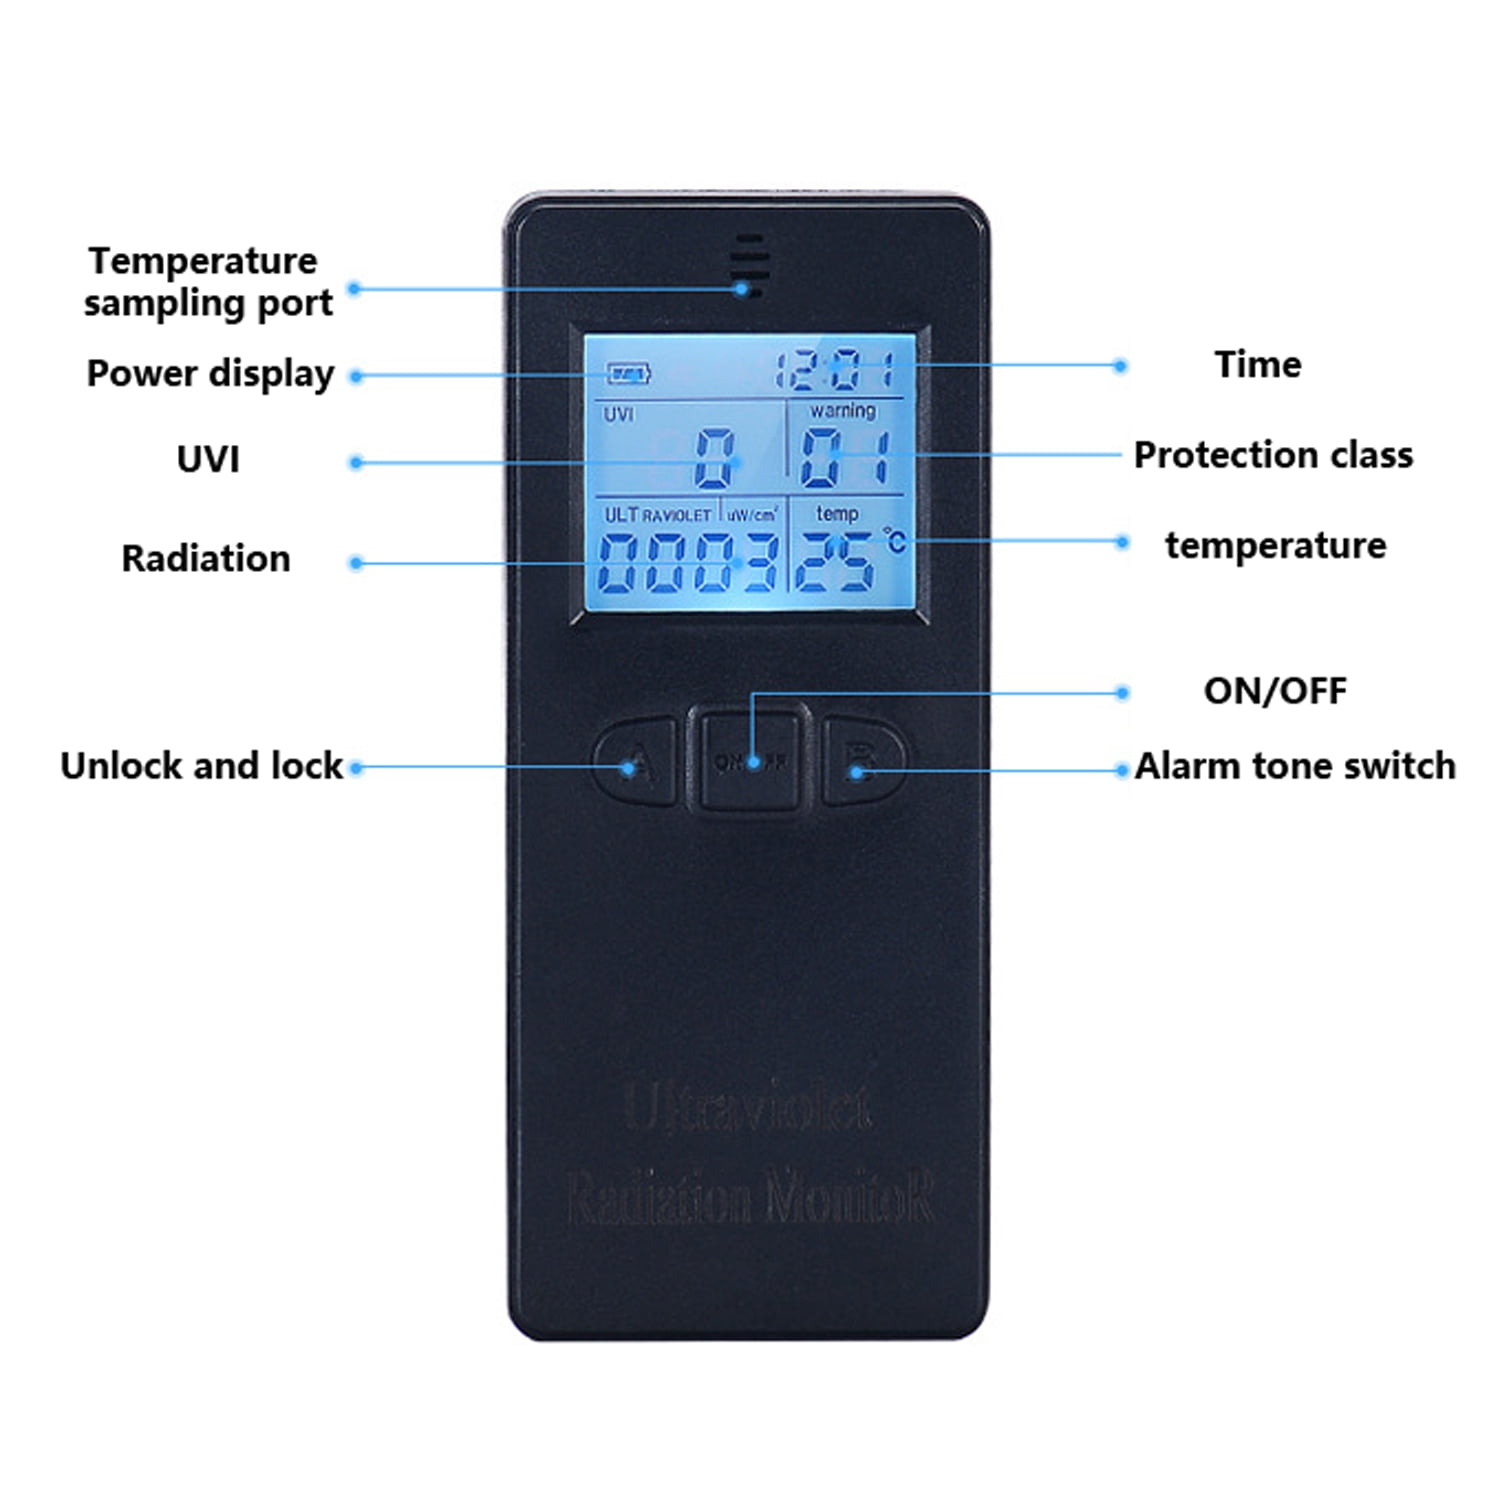 Office Radiation Detector,Ultraviolet Radiation Detector,UV Tester,Radiation Tester,Digital Ultraviolet Radiation Detector with Temperature Display,Suitable for Home Indoor and Outdoor